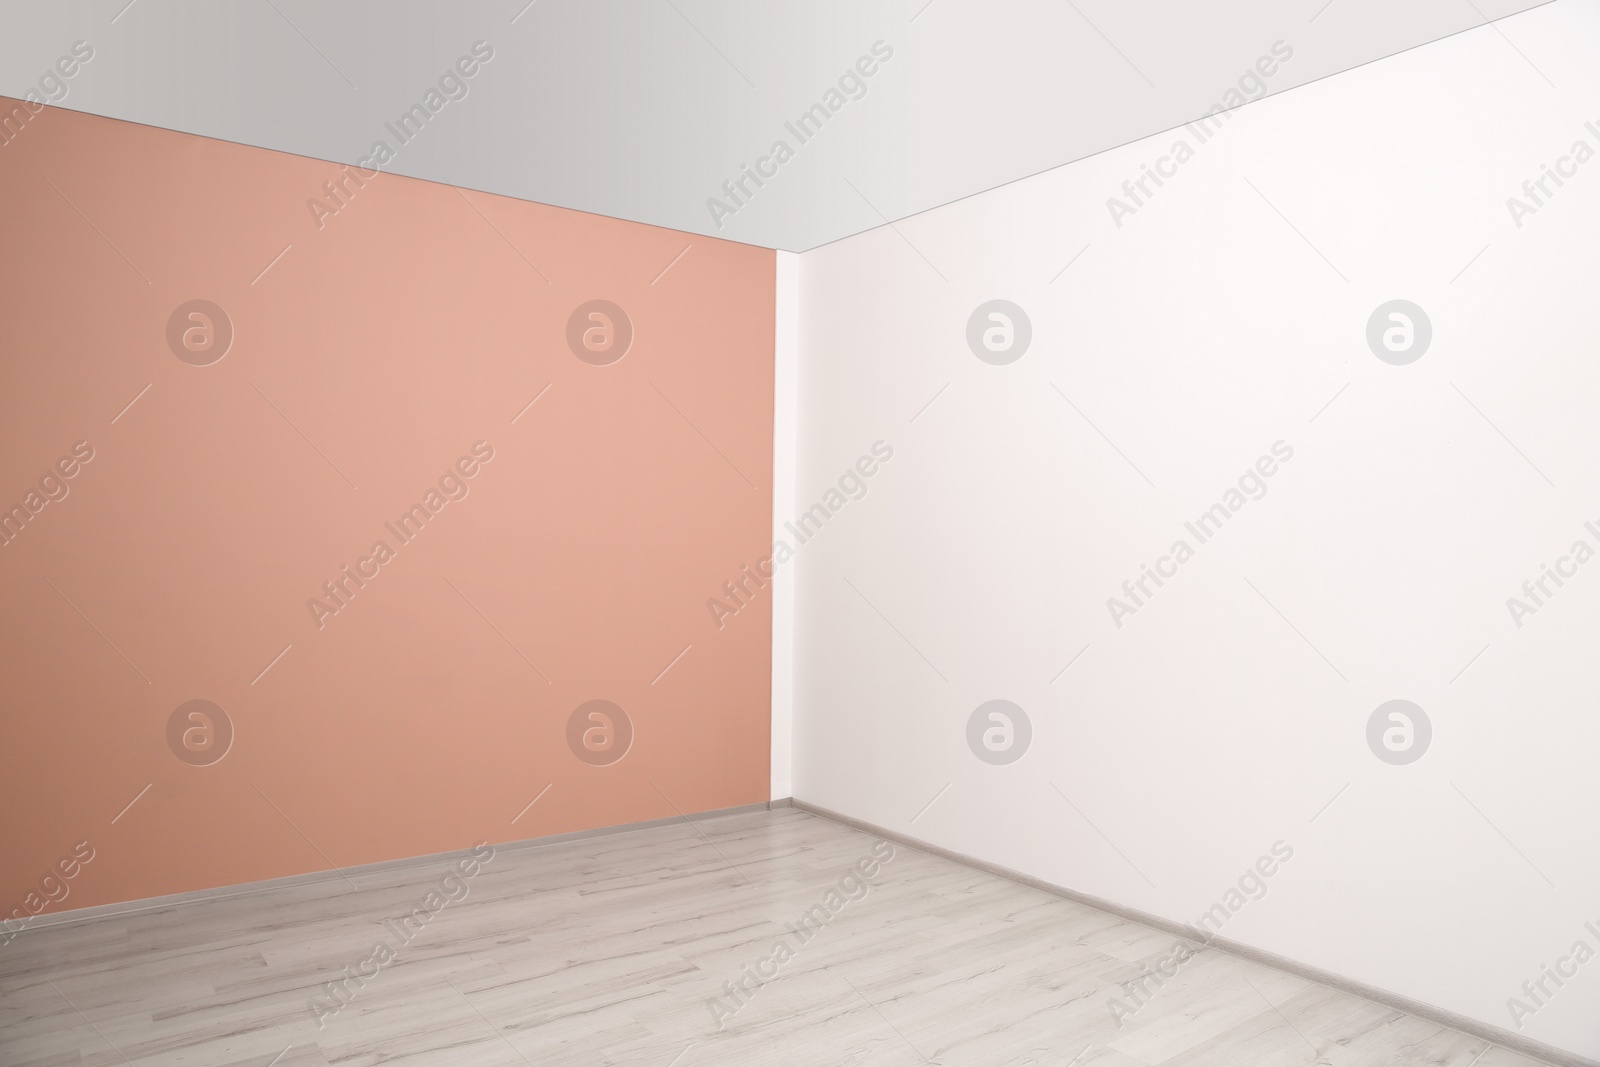 Photo of Empty room with different walls and laminated floor